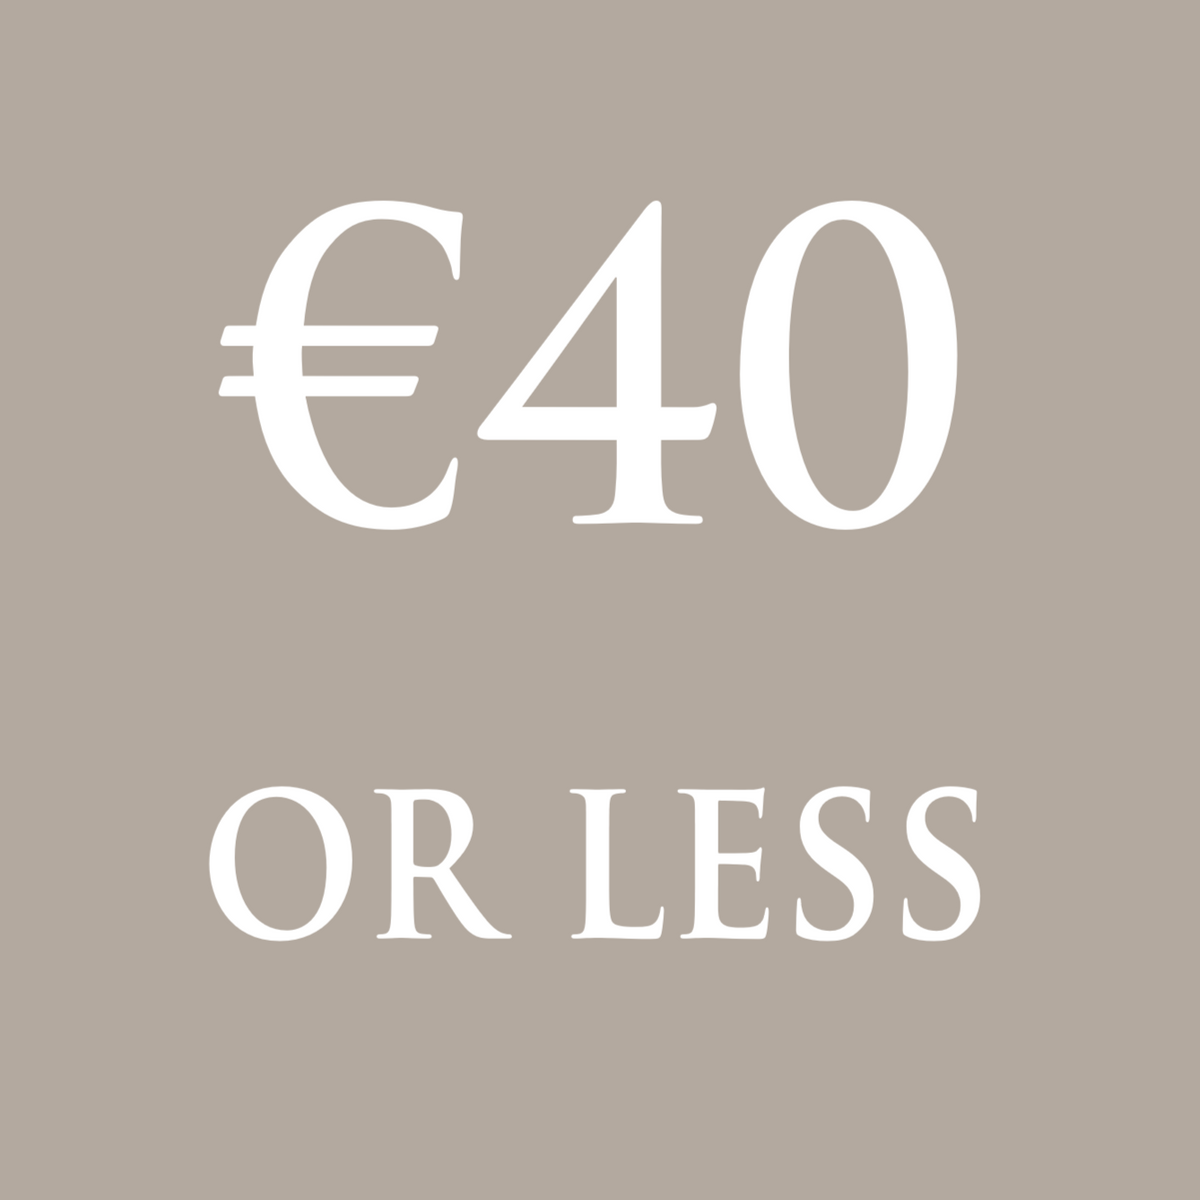 €40 or less